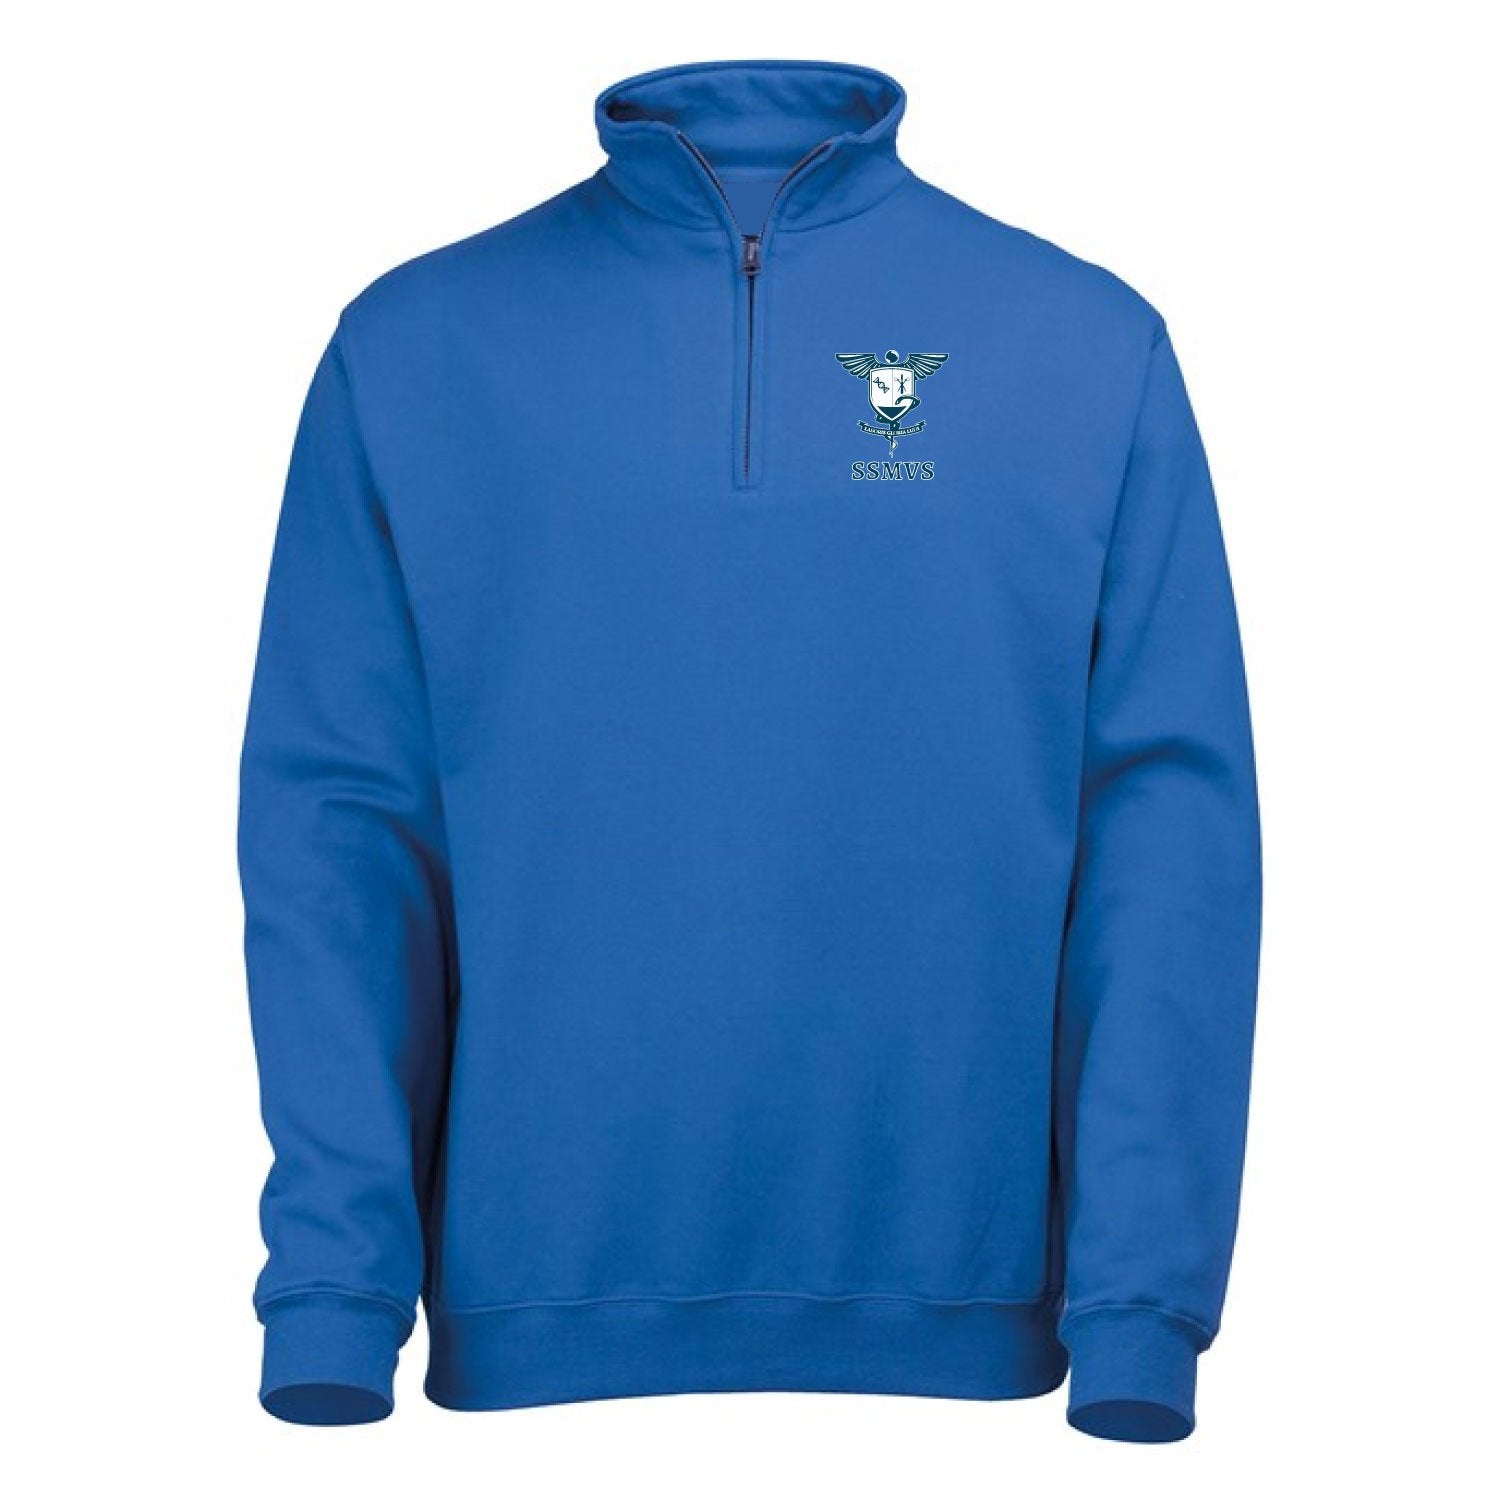 sidney sussex medical and veterinary society quater zip sweatshirt royal